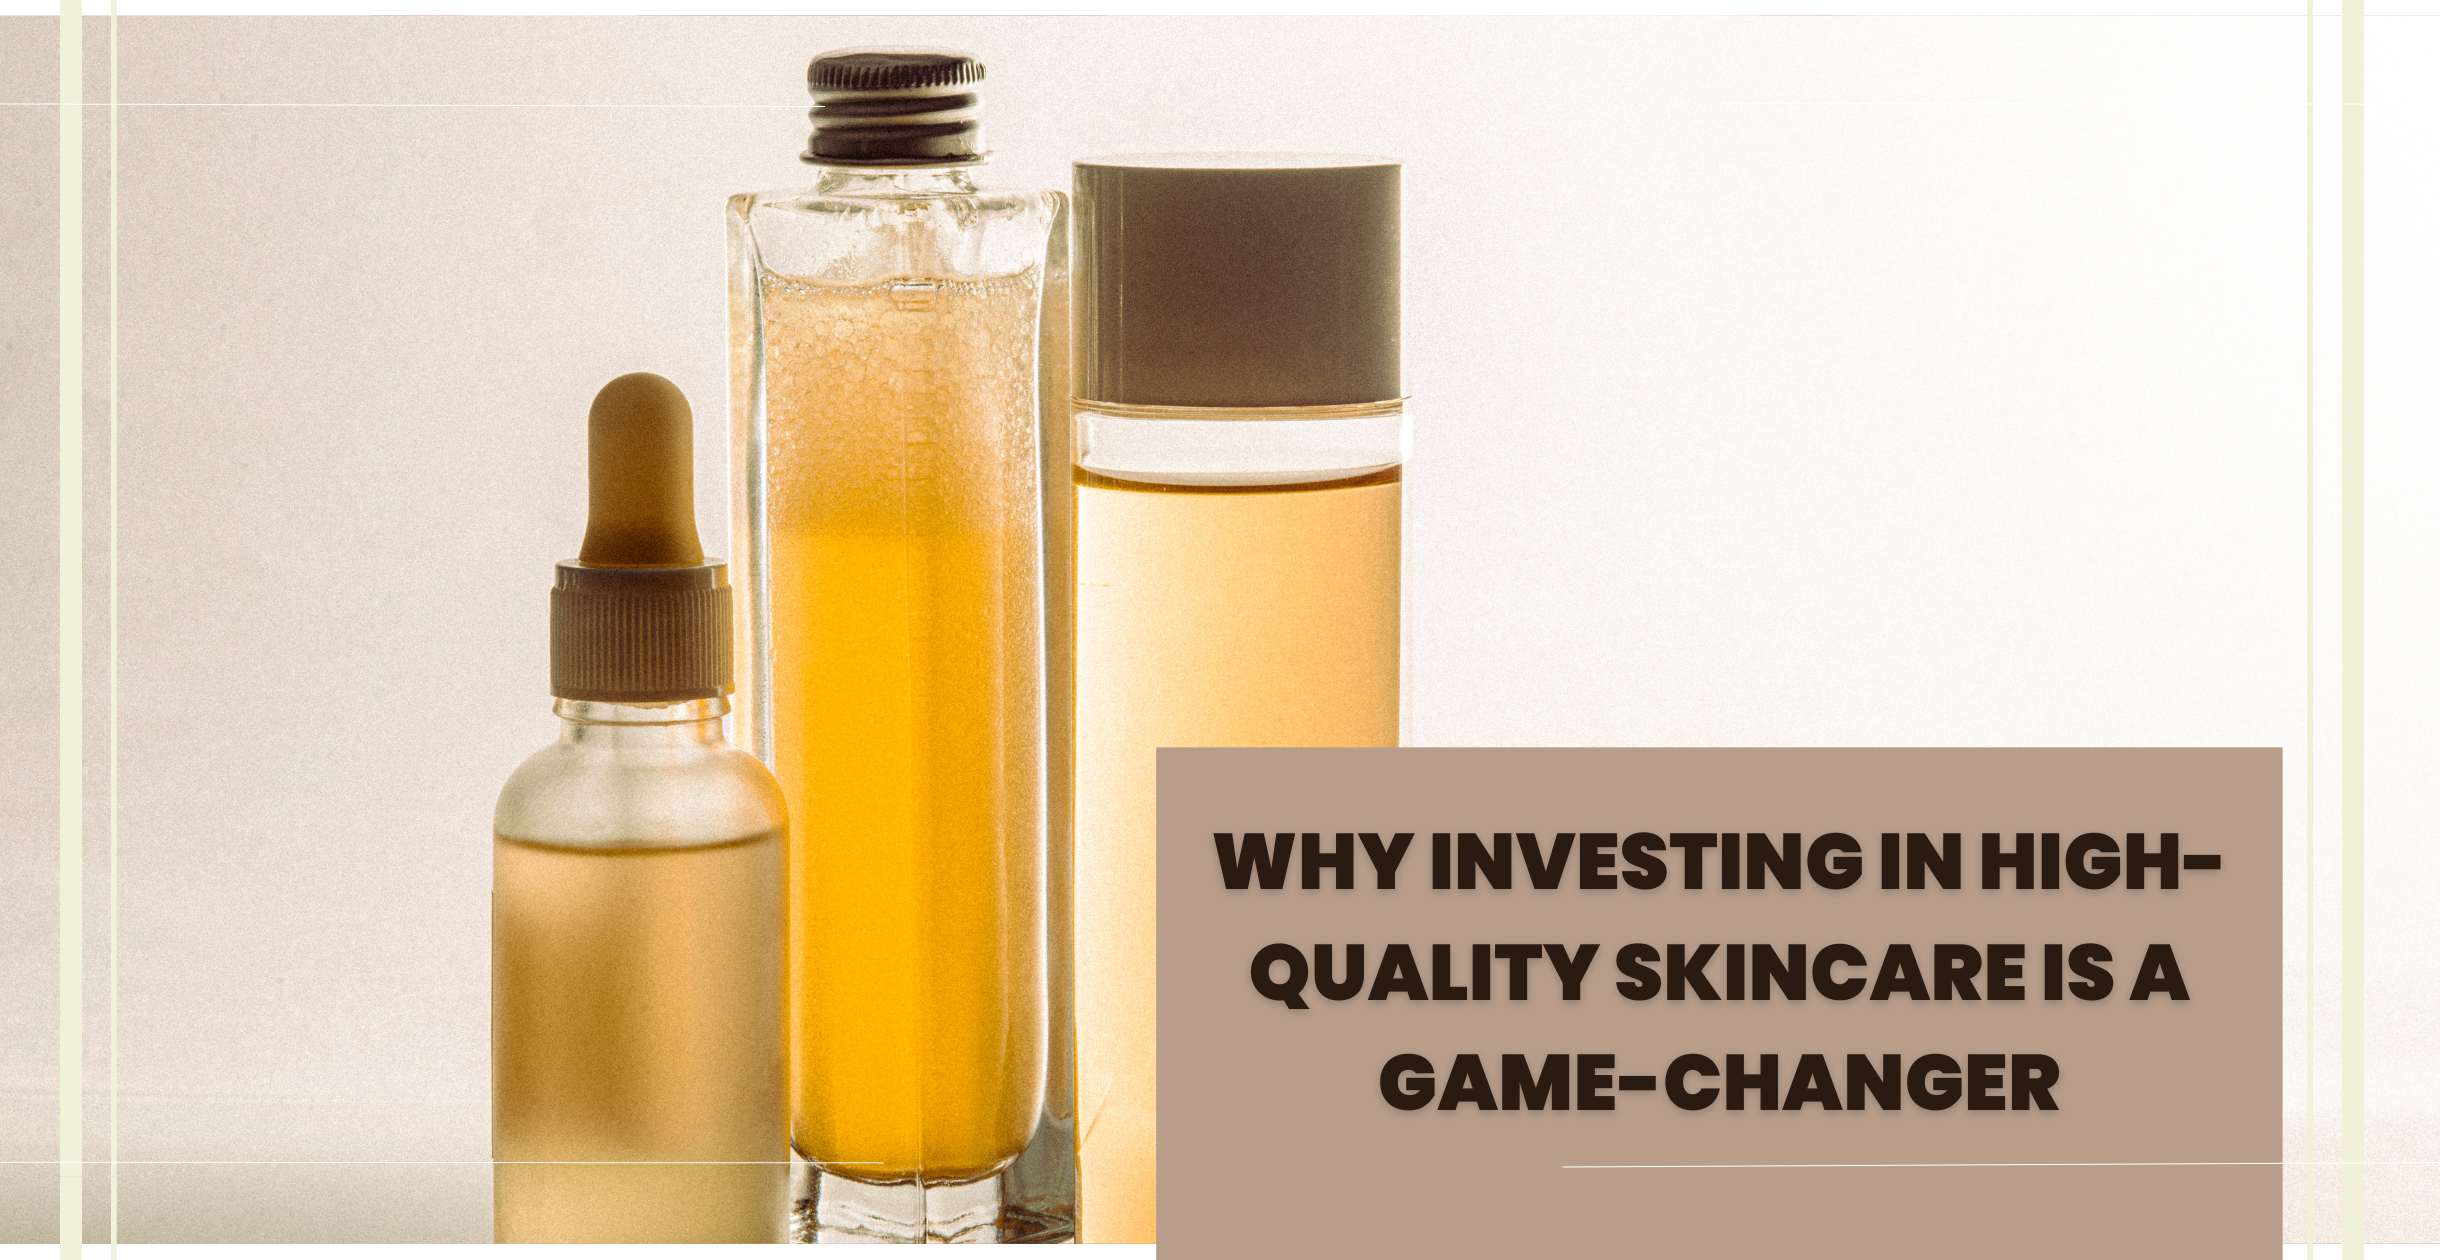 Why Investing in High-Quality Skincare is a Game-Changer